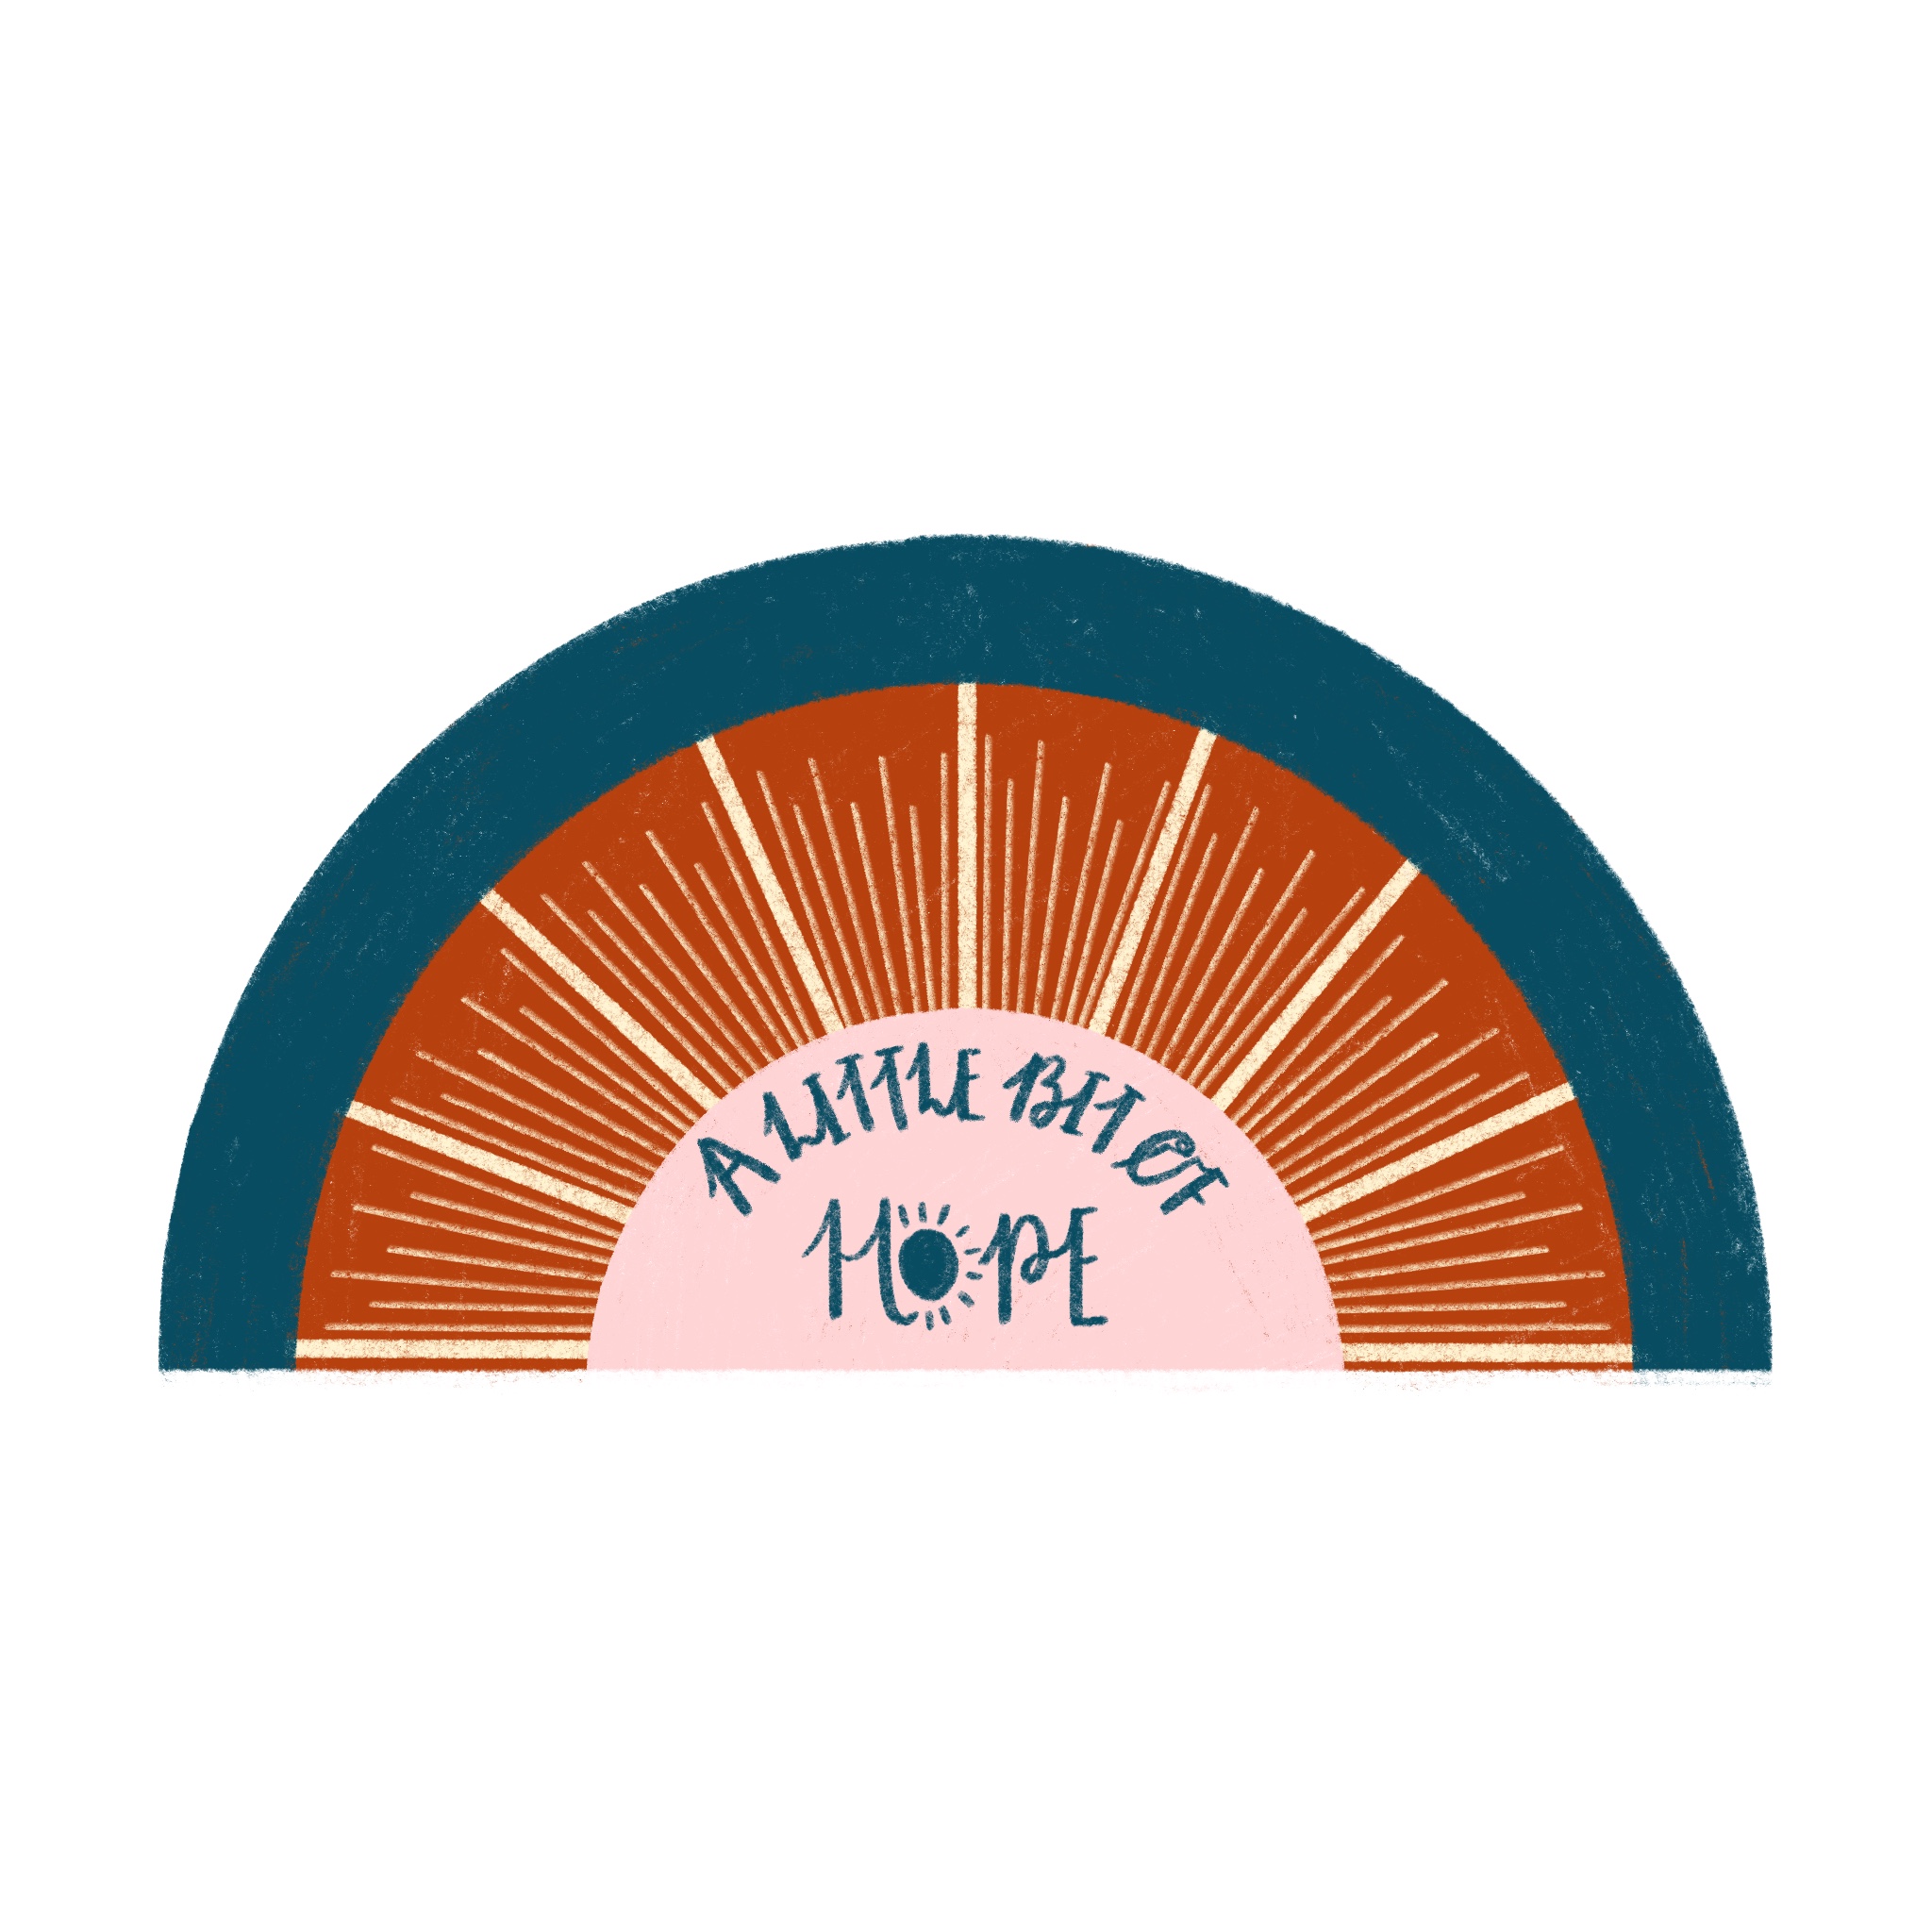 The A Little Bit of Hope Logo - a semi circle with navy, rust and pink, with yellow lines that are symbolic of a drawn sun. A Little Bit of Hope is written in navy on the pink segment of the semi circle.